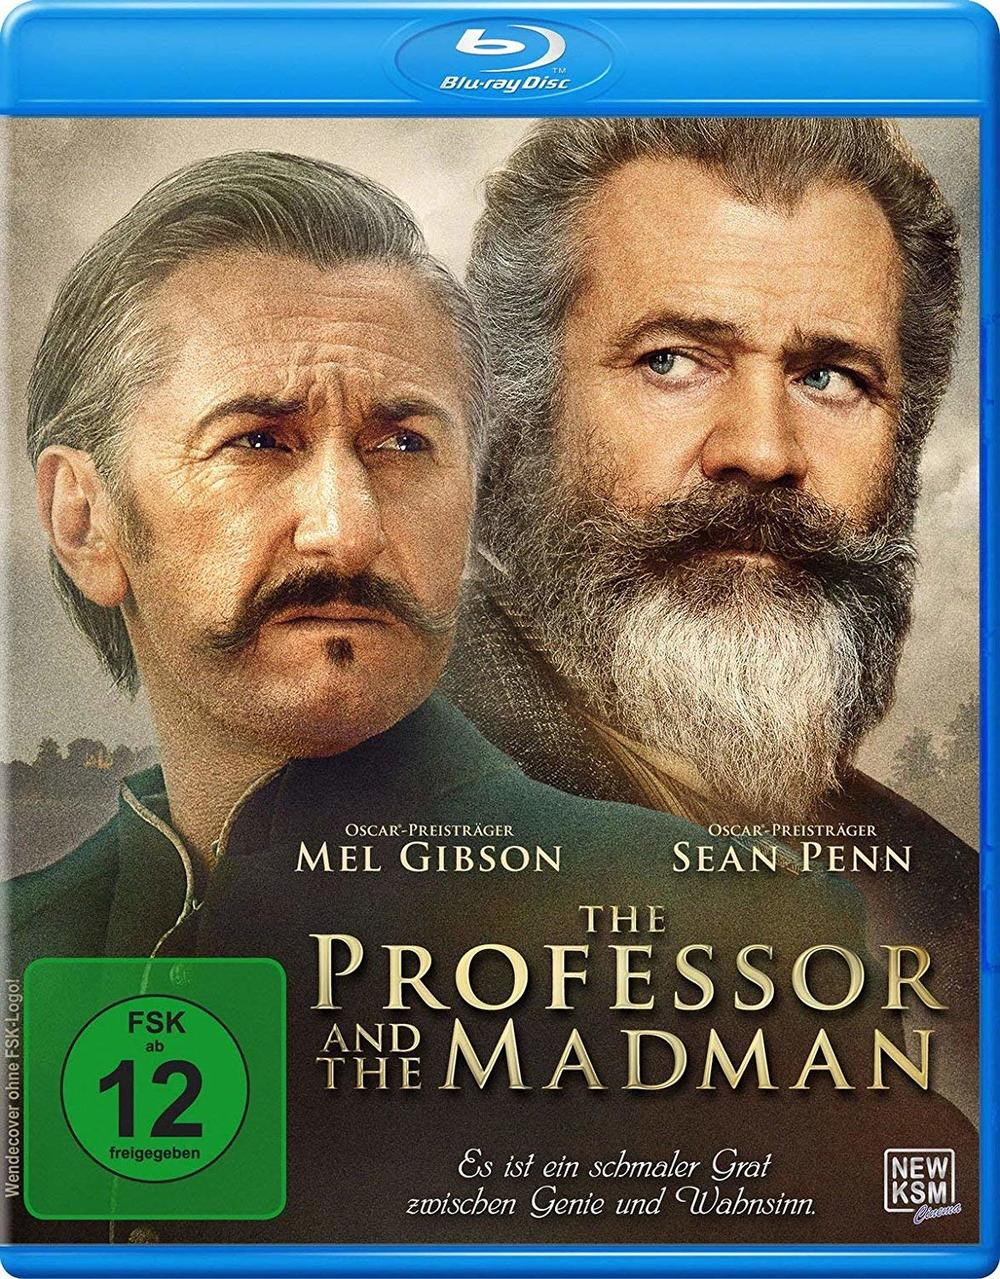 The Professor and the Blu-ray Madman